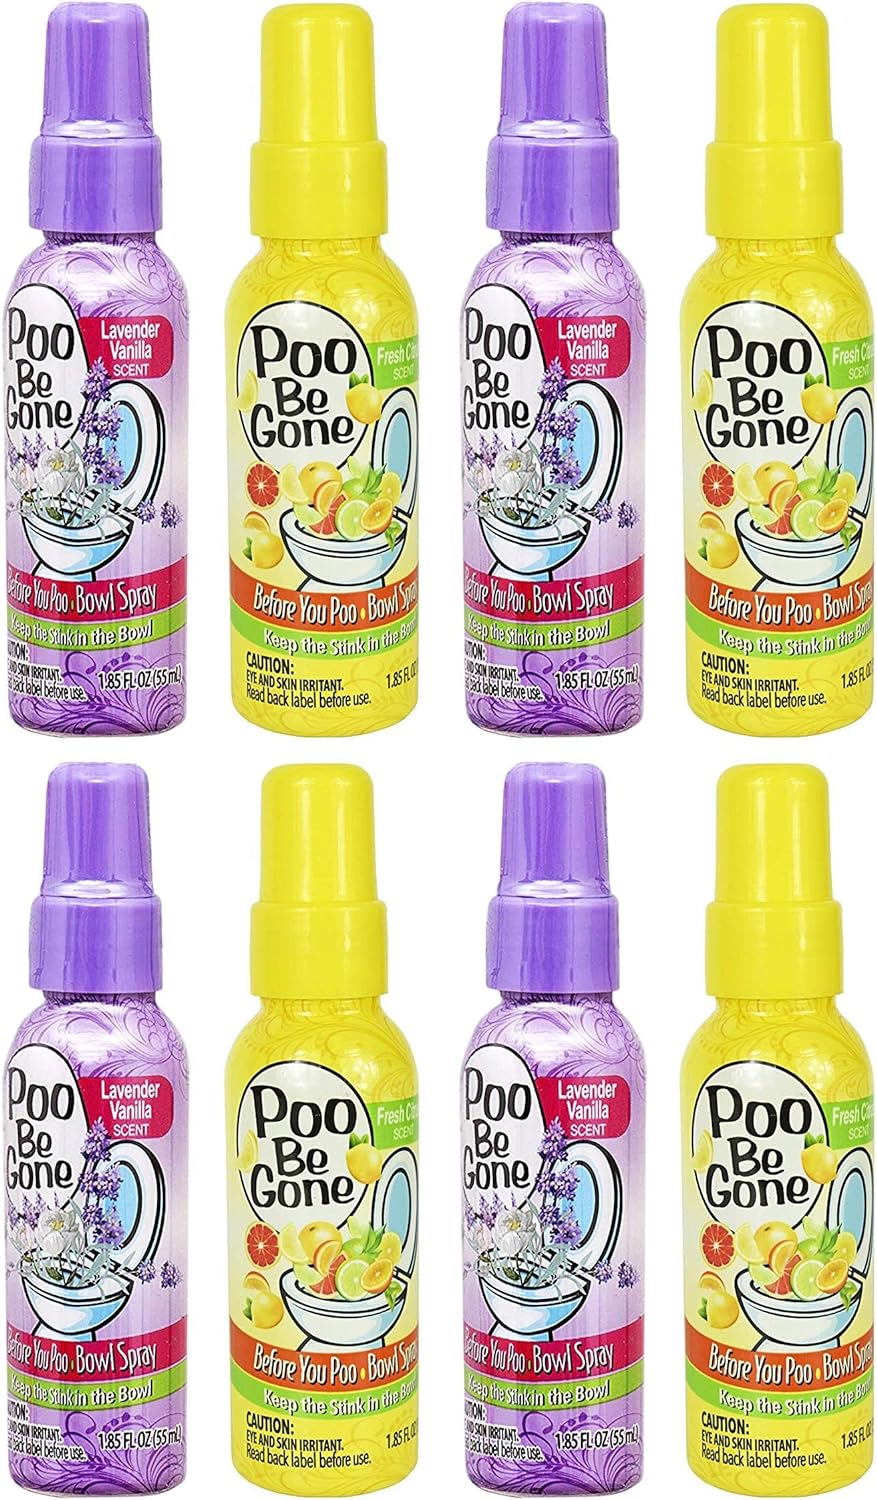 Set of 8 Stinky Bowl Spray 1.85oz - Before You Go Toilet Bathroom Deodorizer - Features Fresh Citrus Scent and Lavender Scent!